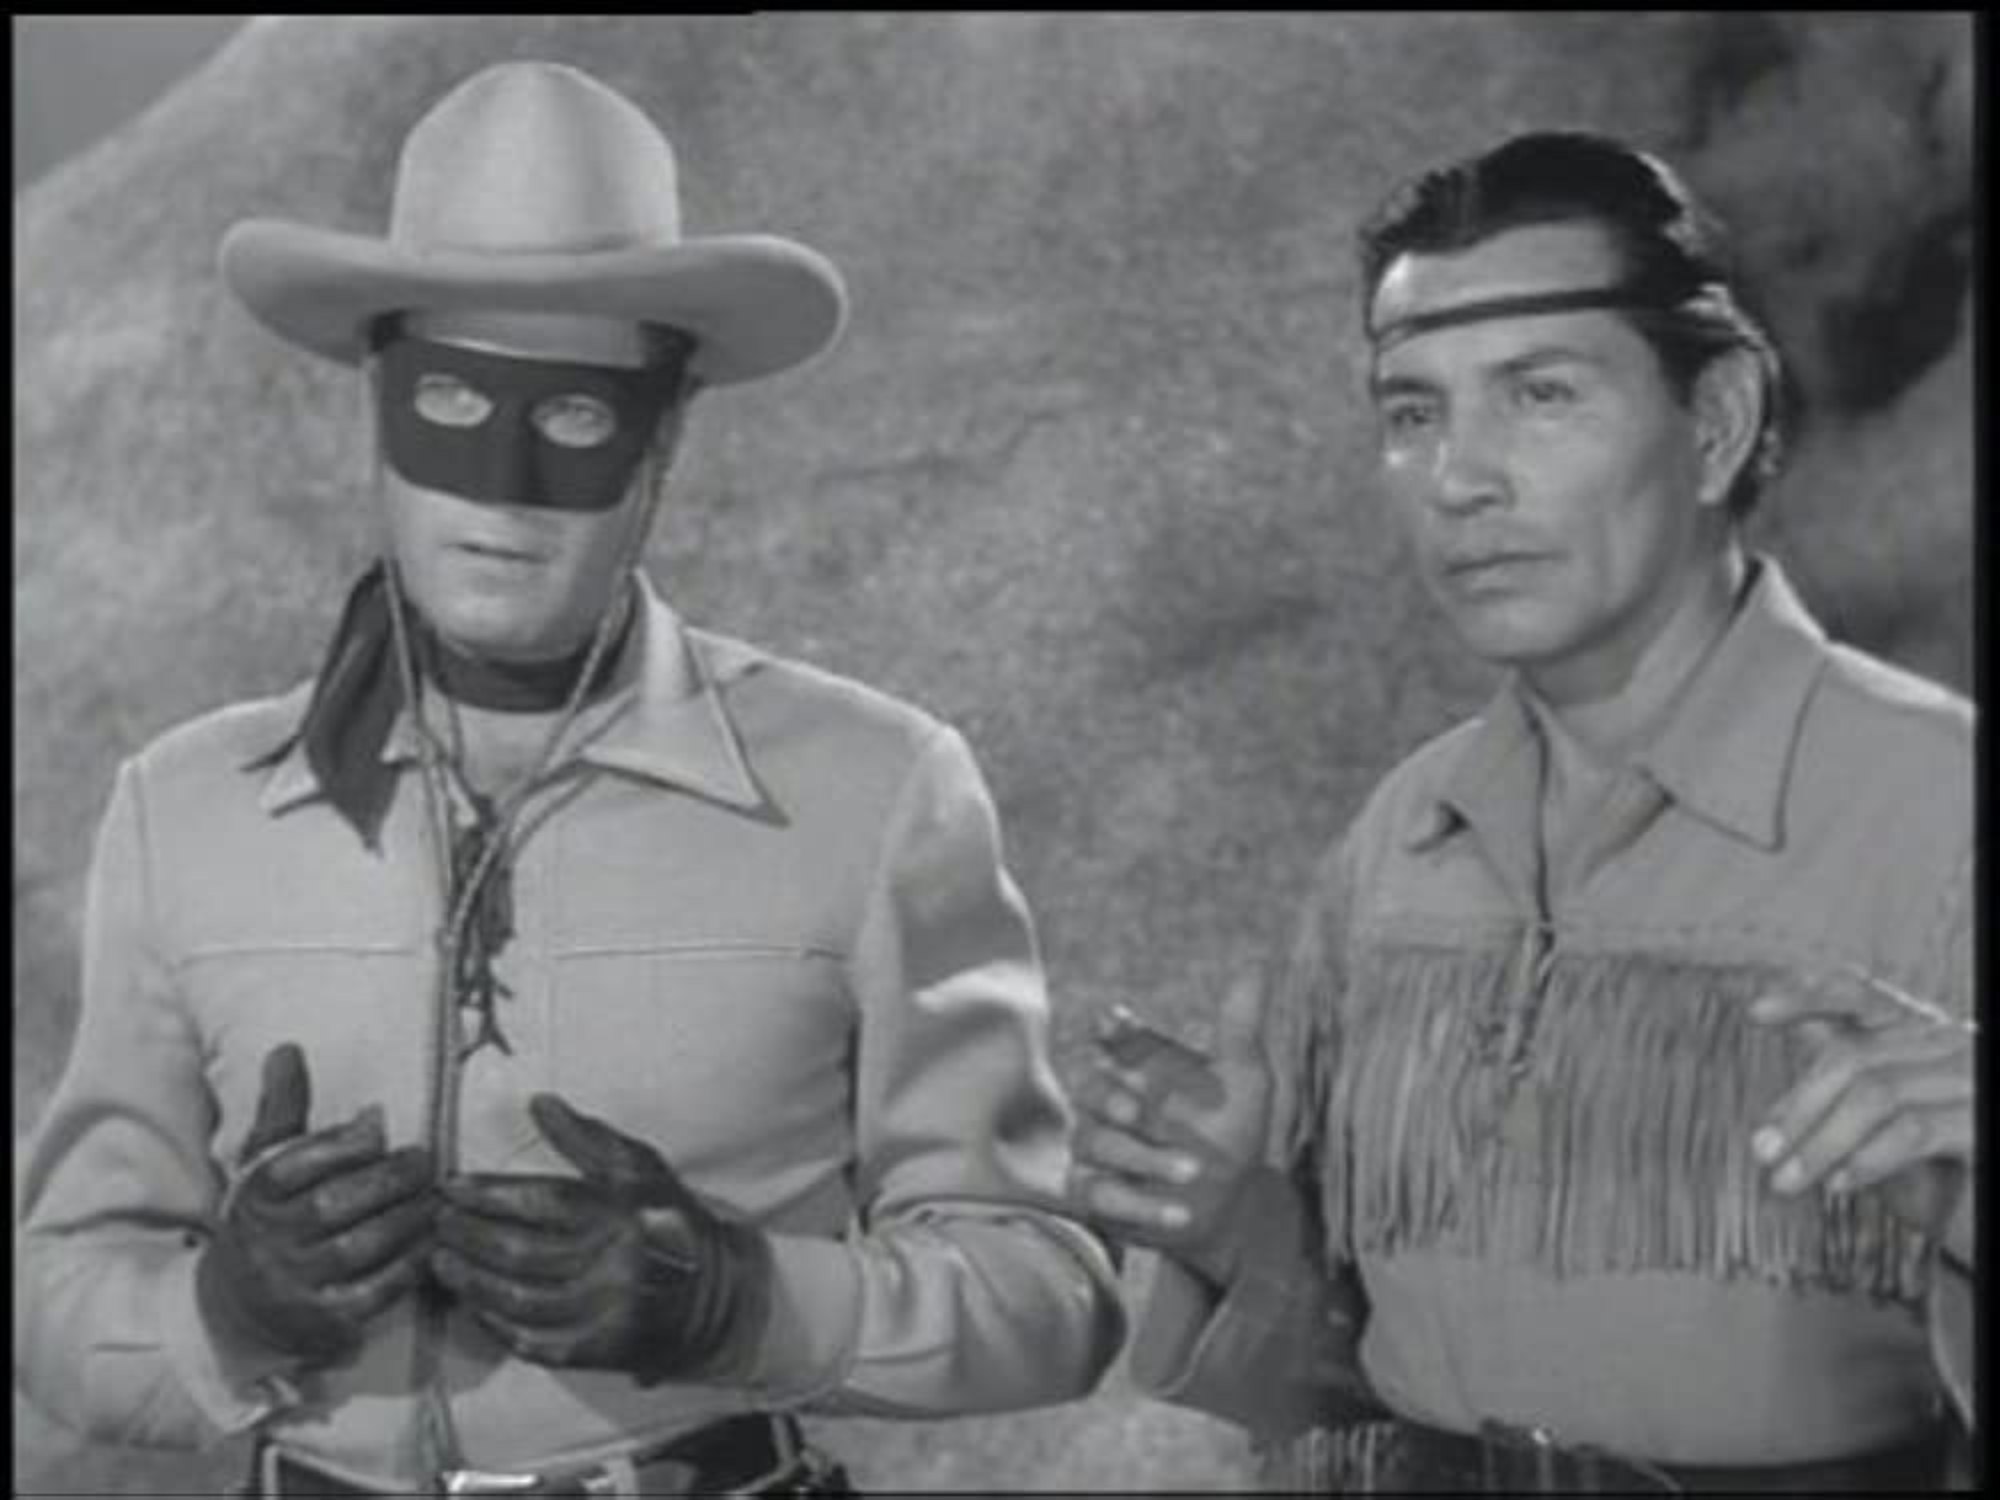 'The Lone Ranger' Clayton Moore as the Lone Ranger and Jay Silverheels as Tonto. The Lone Ranger is holding his hands against his stomach, while Tonto is holding his hands up.